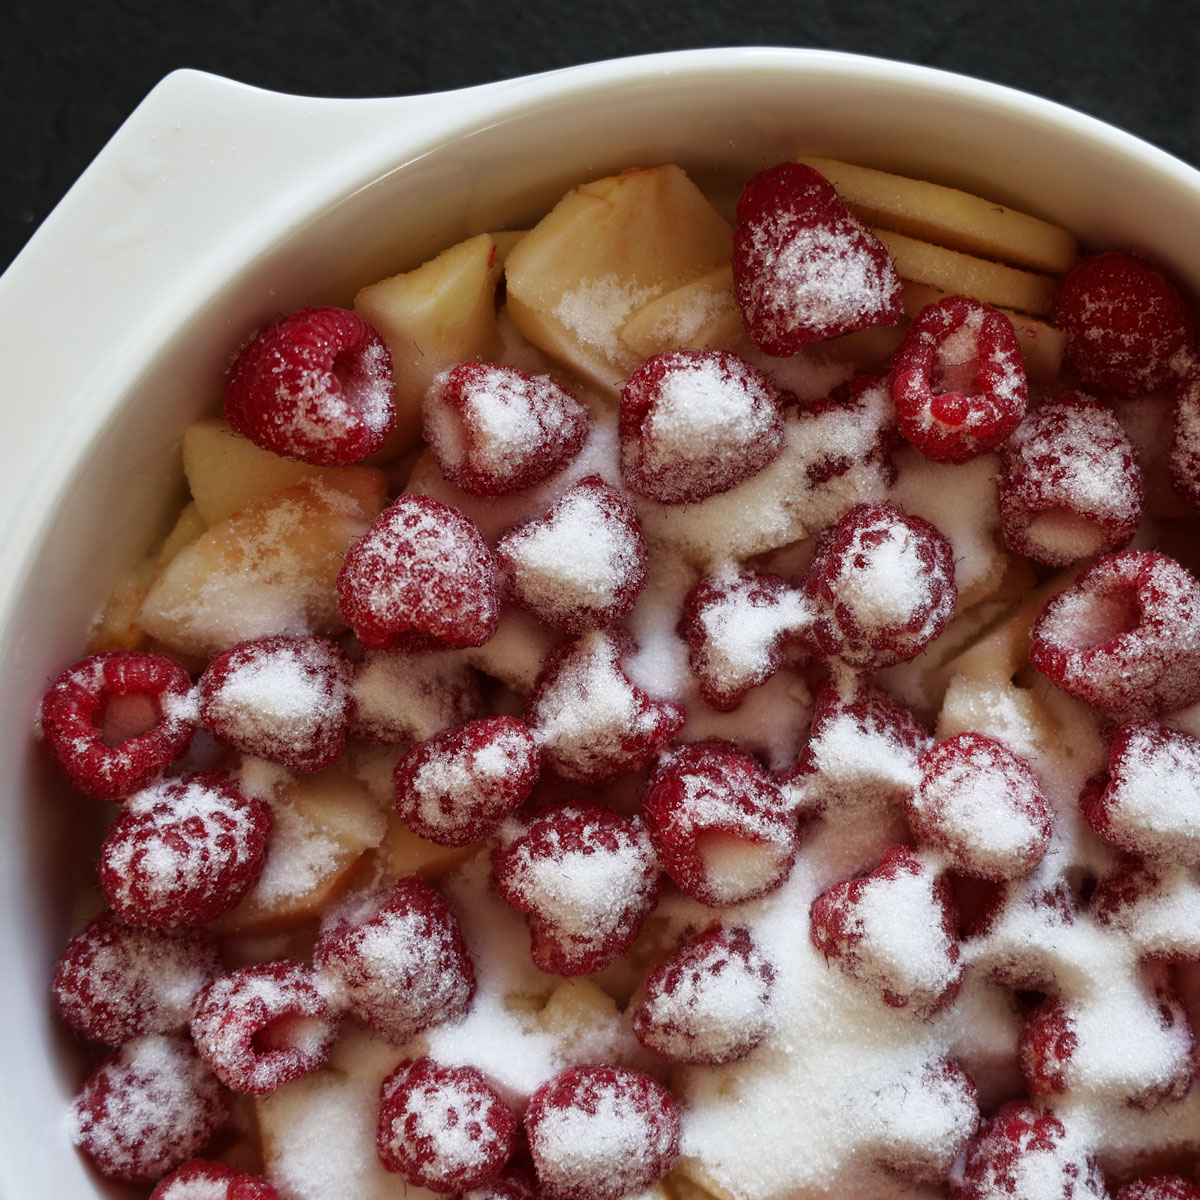 Sliced apples and fresh raspberries sprinkled with caster sugar.